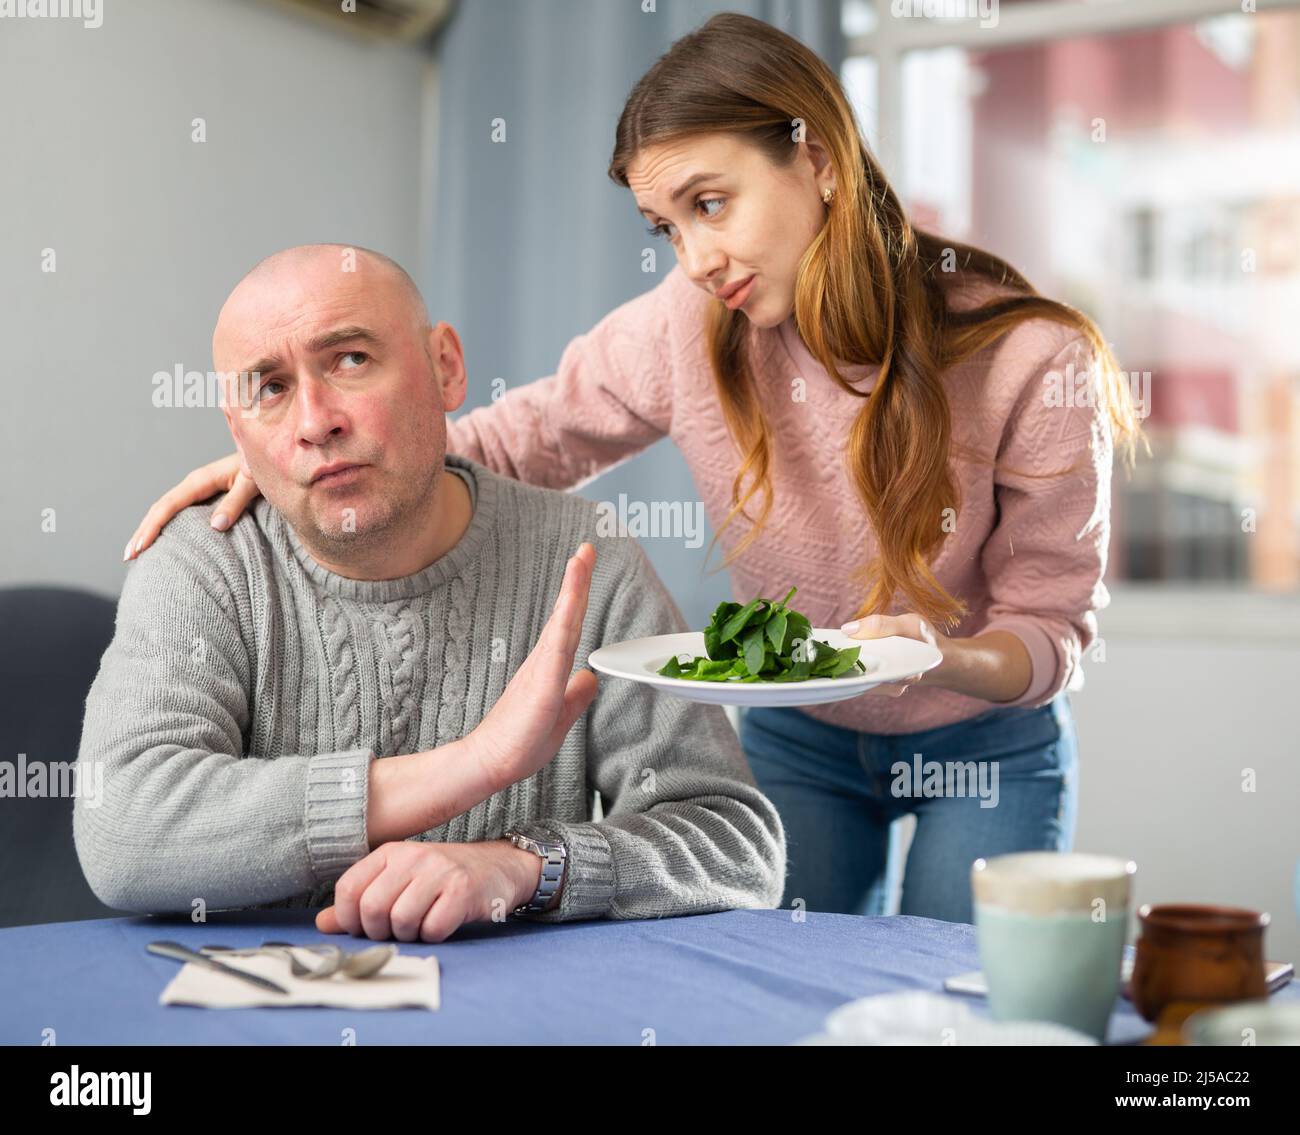 Man dissatisfied by dinner made by his wife Stock Photo